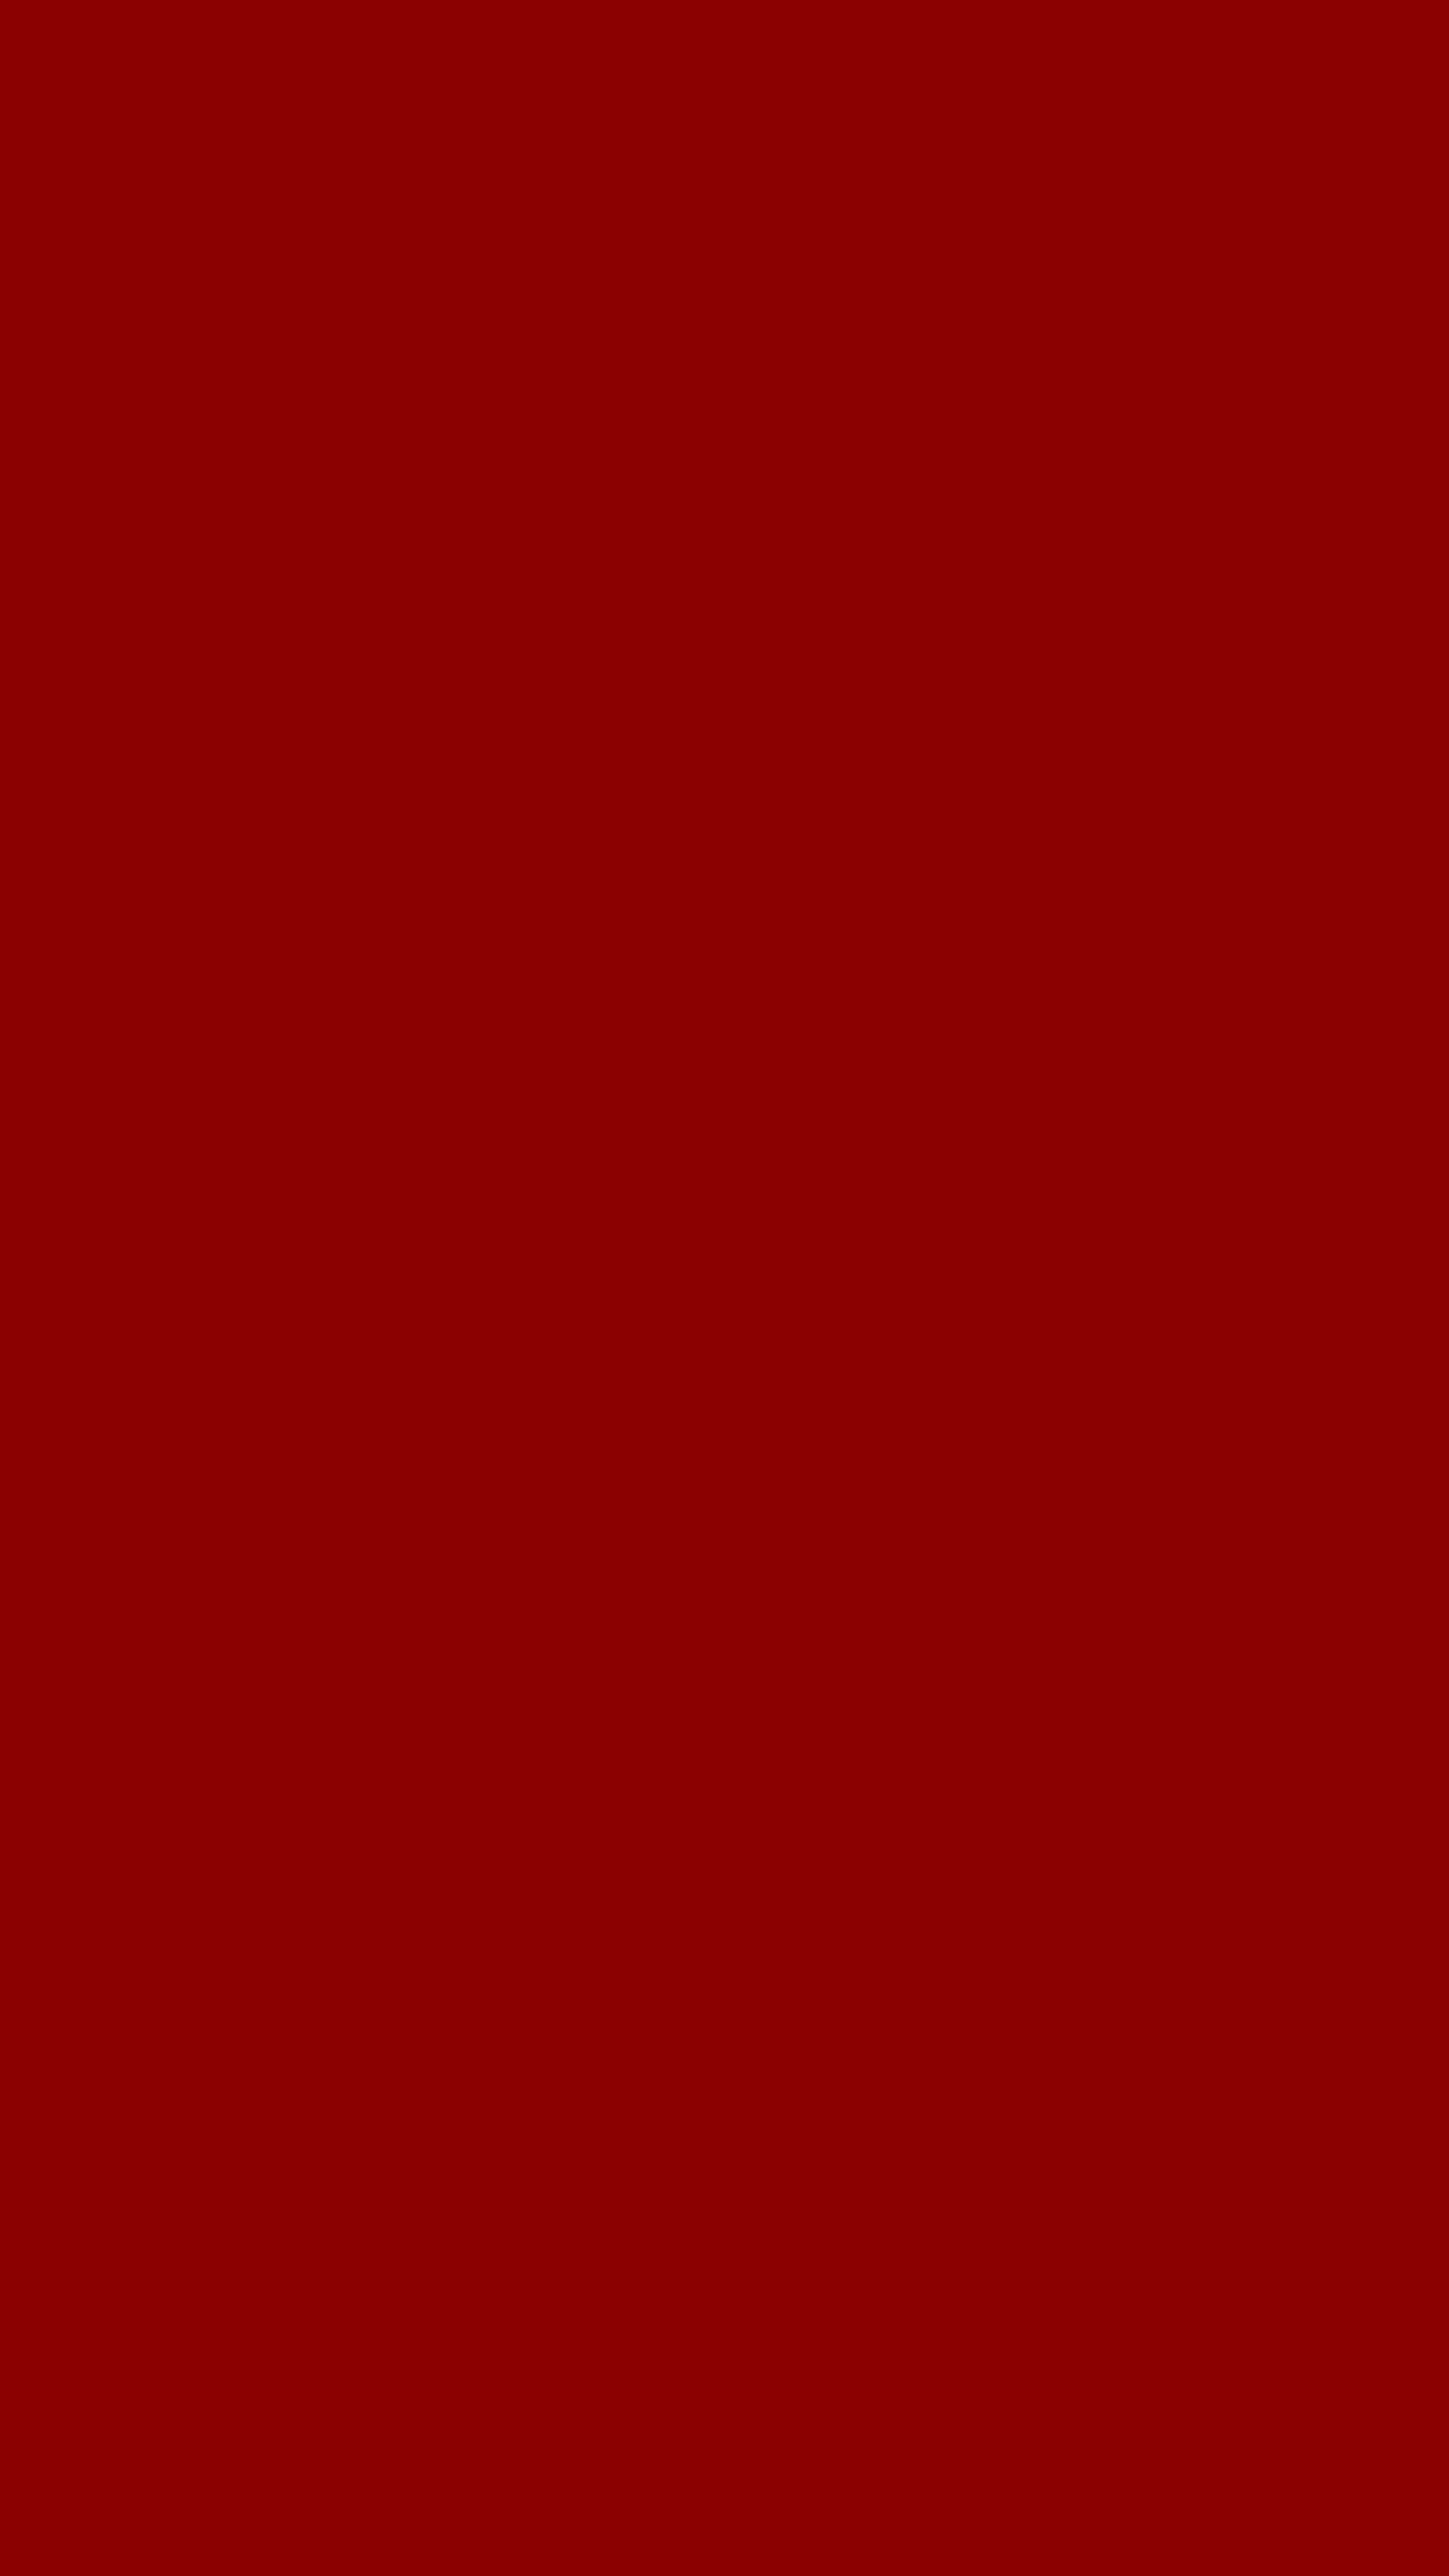 2160x3840 Dark Red Solid Color Background Wallpaper for Mobile Phone